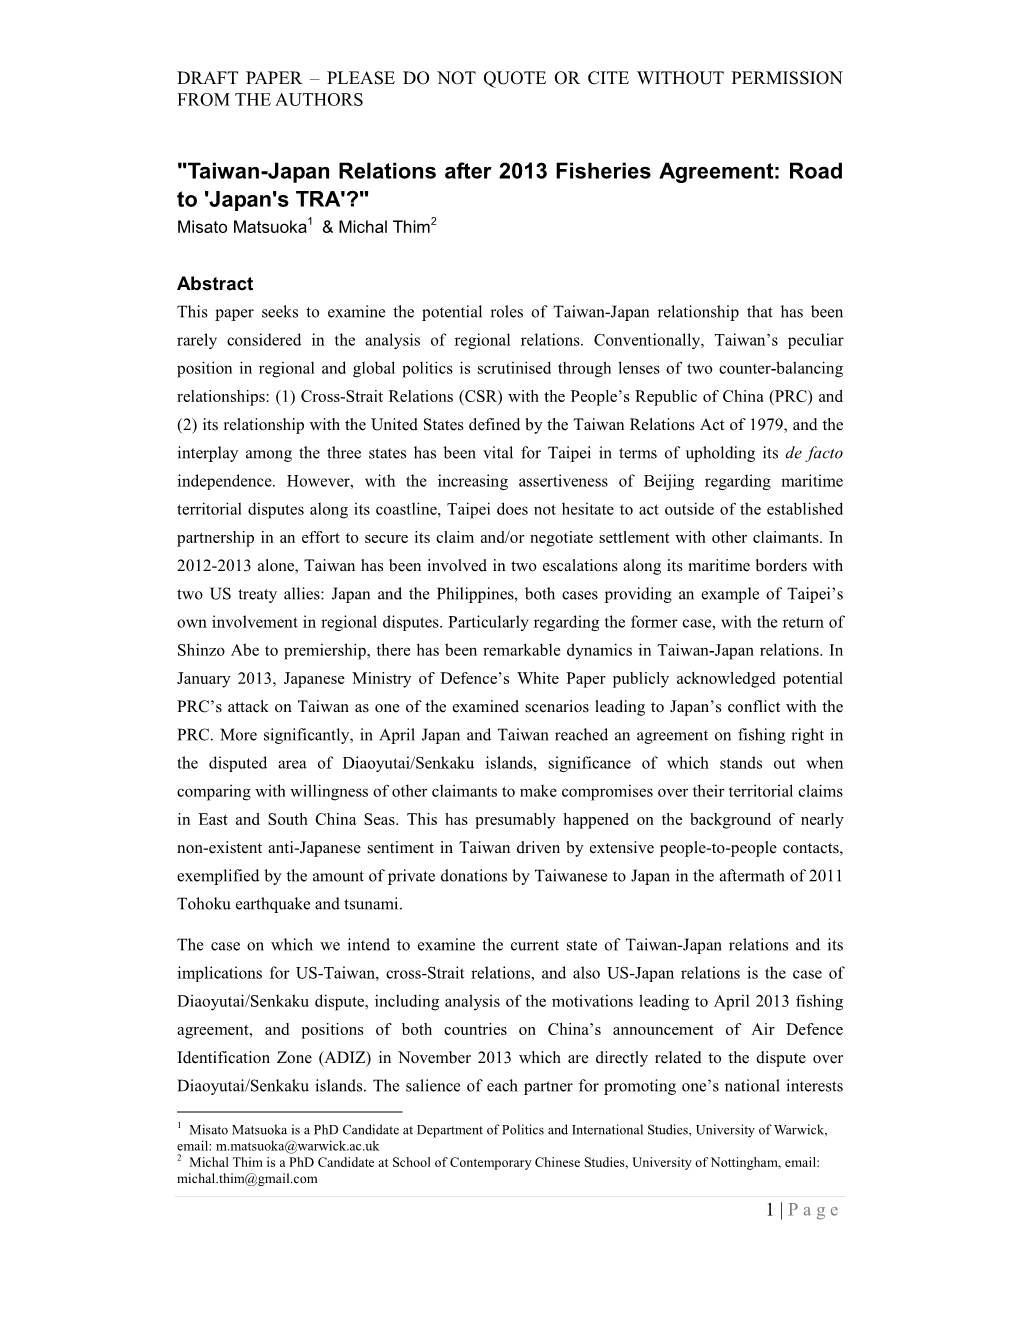 "Taiwan-Japan Relations After 2013 Fisheries Agreement: Road to 'Japan's TRA'?" Misato Matsuoka 1 & Michal Thim 2